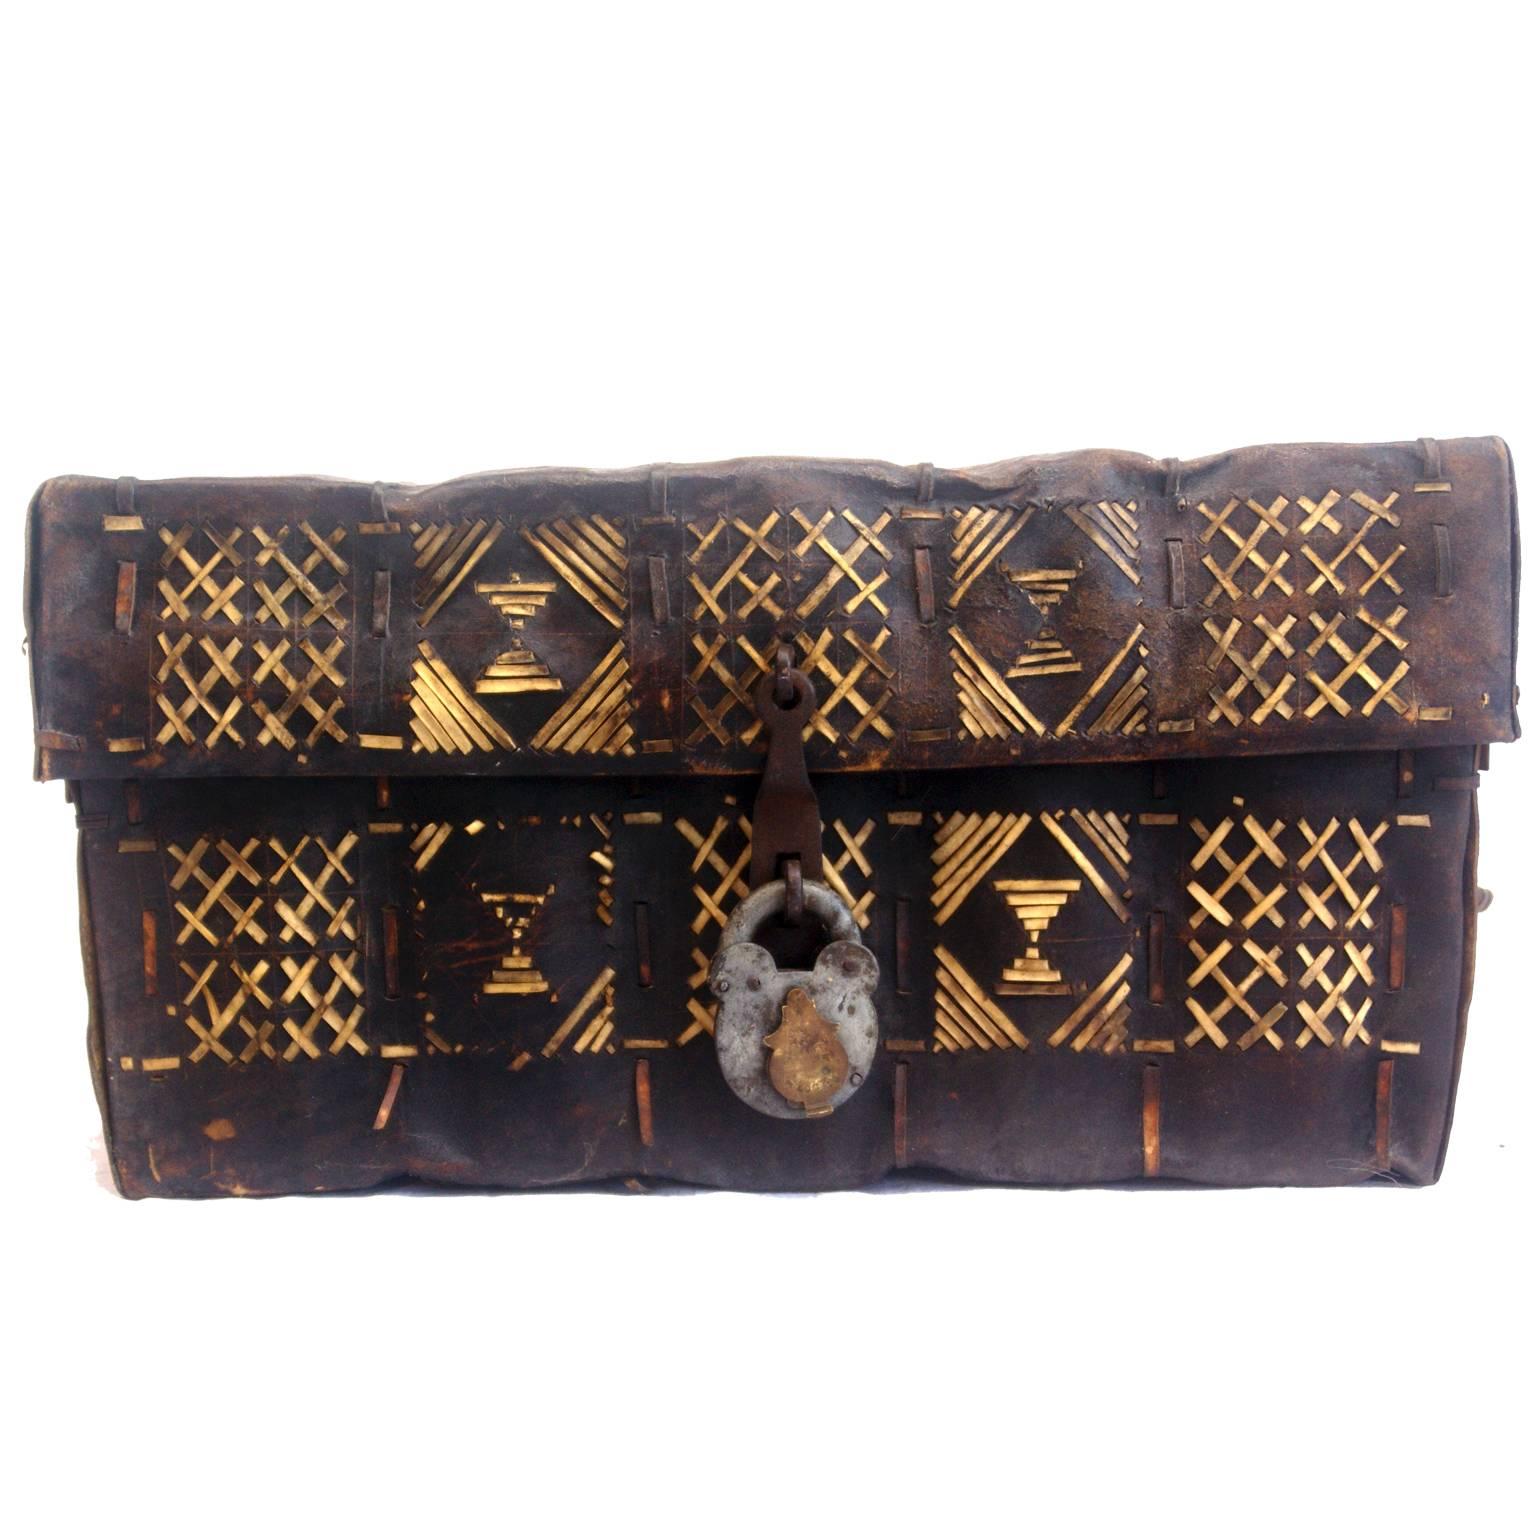 African rawhide deeds box. Extremely heavy-duty Leather box made by folding and then stitching hide with light coloured rawhide stripes in traditional geometric patterns.
The box is closed by means of a very heavy-duty hasp and contemporary padlock